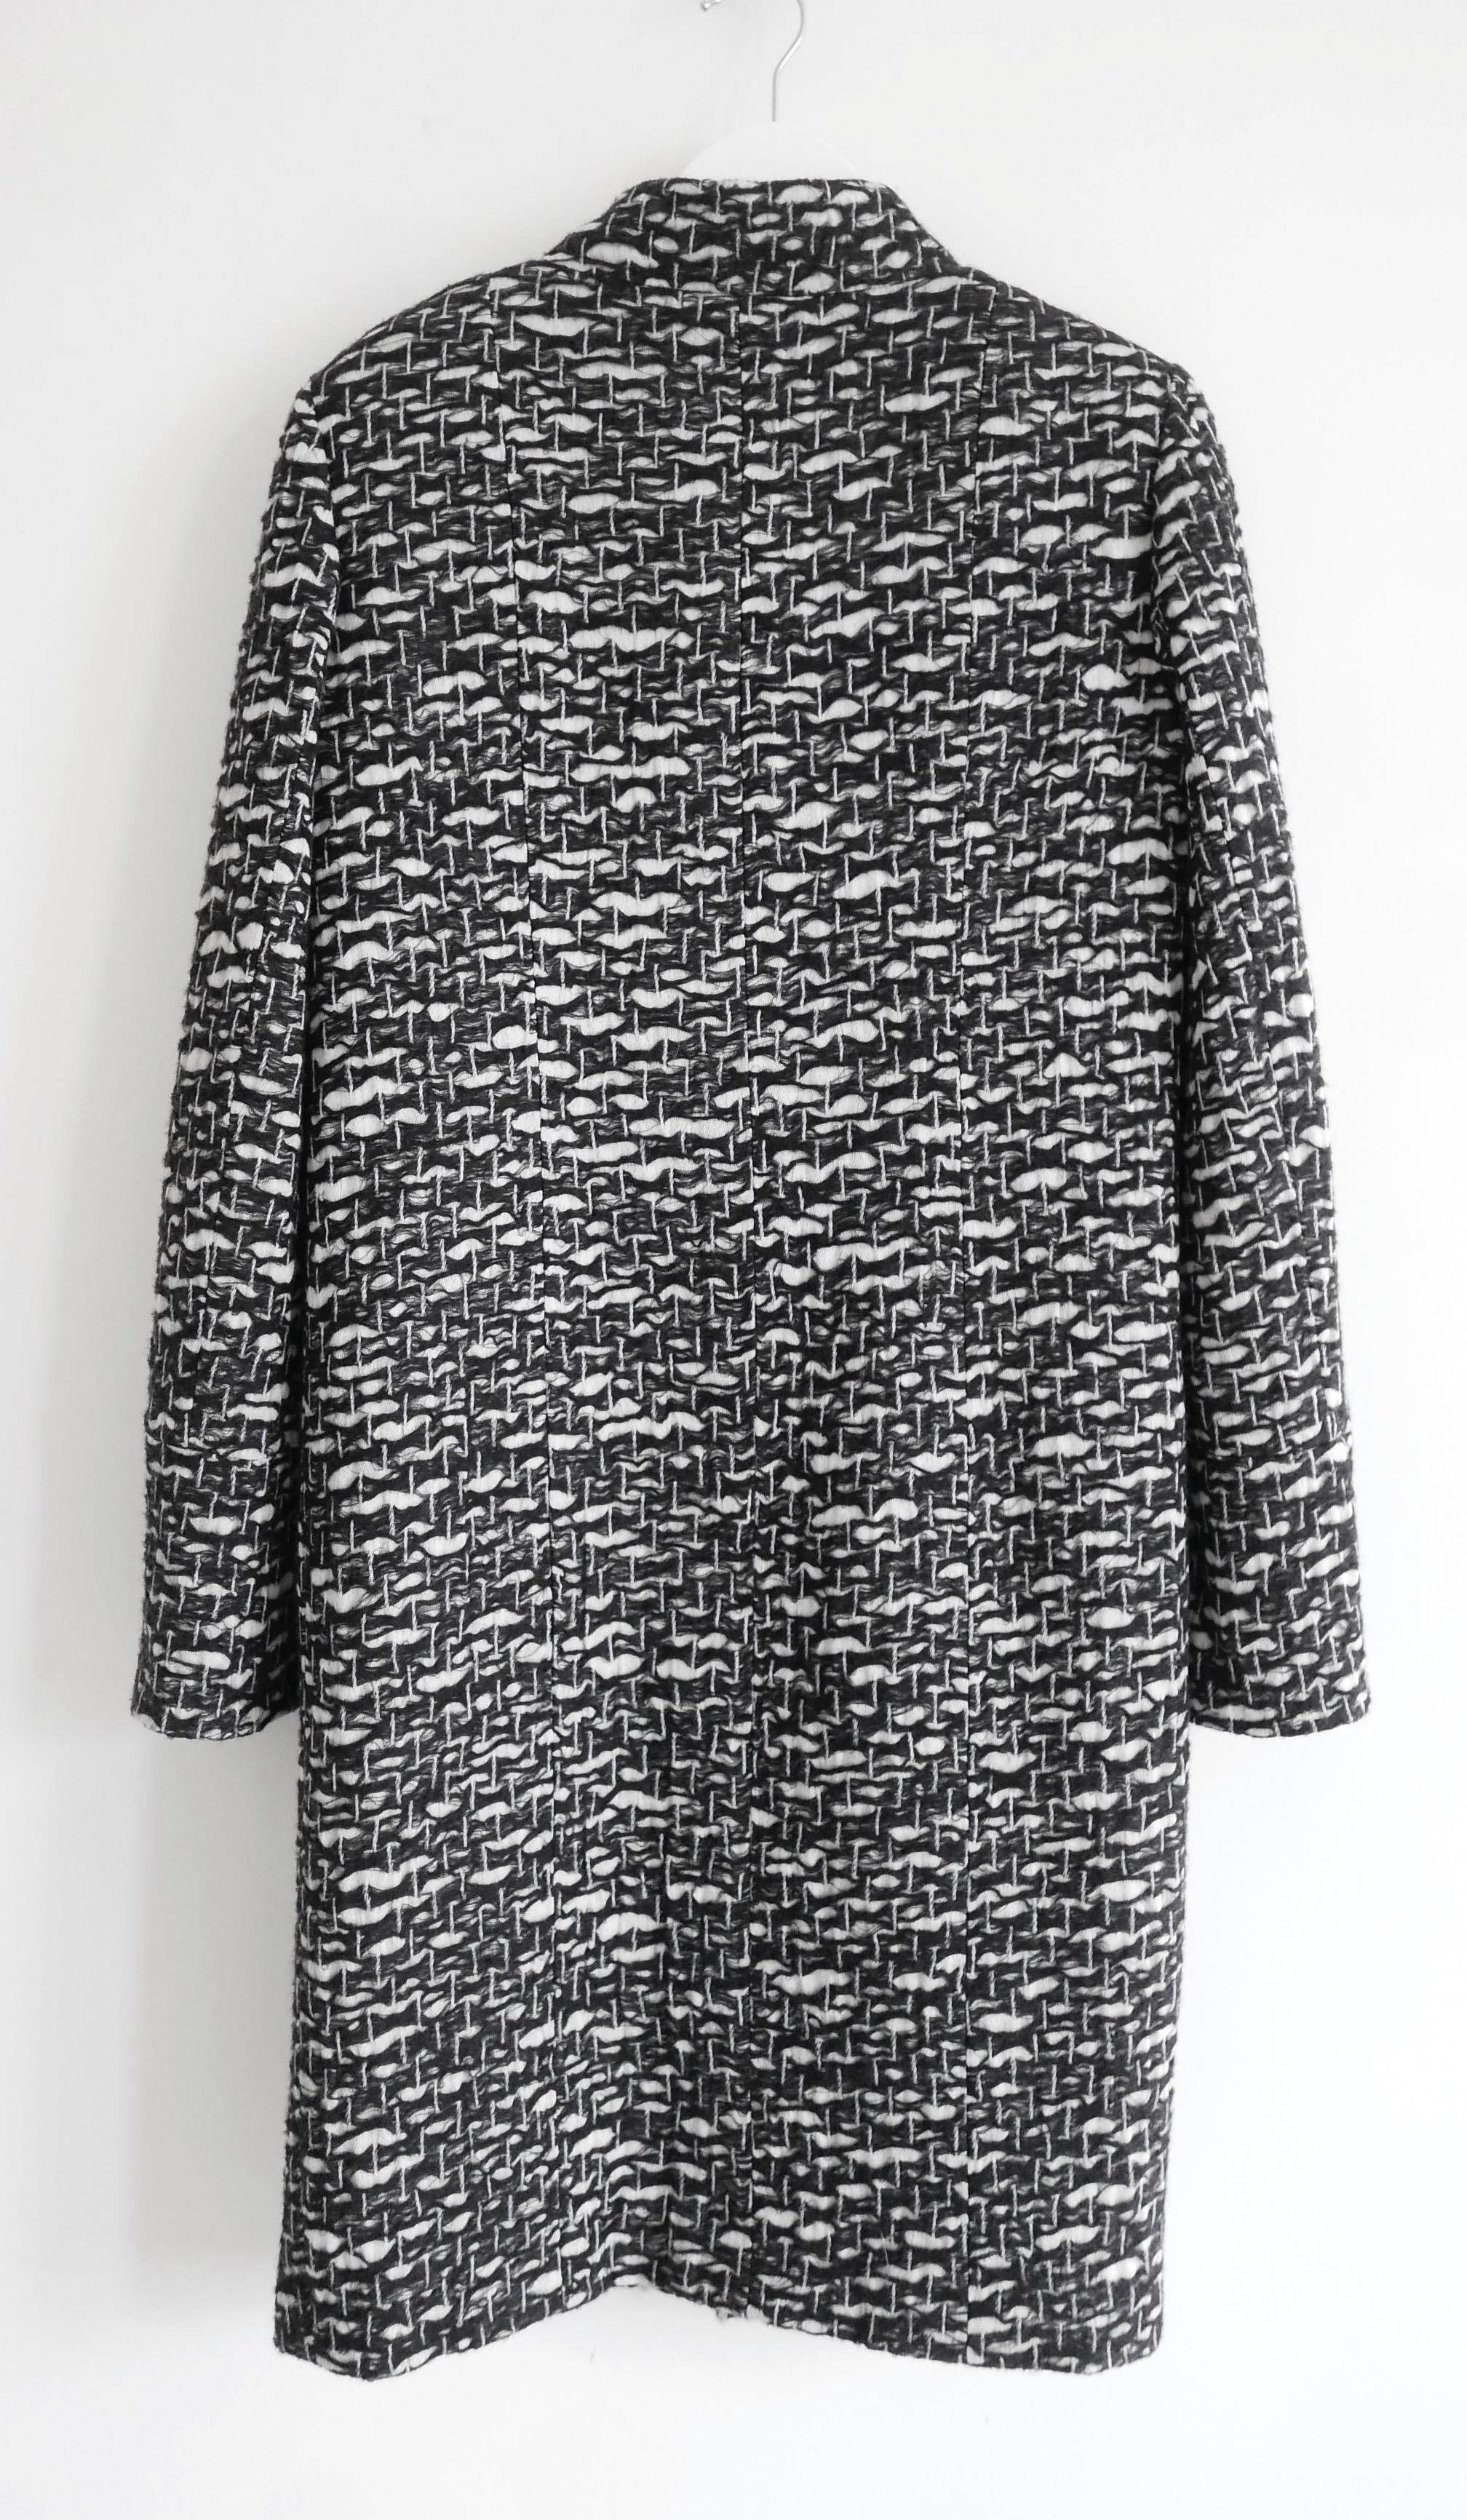 Chanel Fall 2010 Black & White Loose Weave Tweed Coat For Sale 1